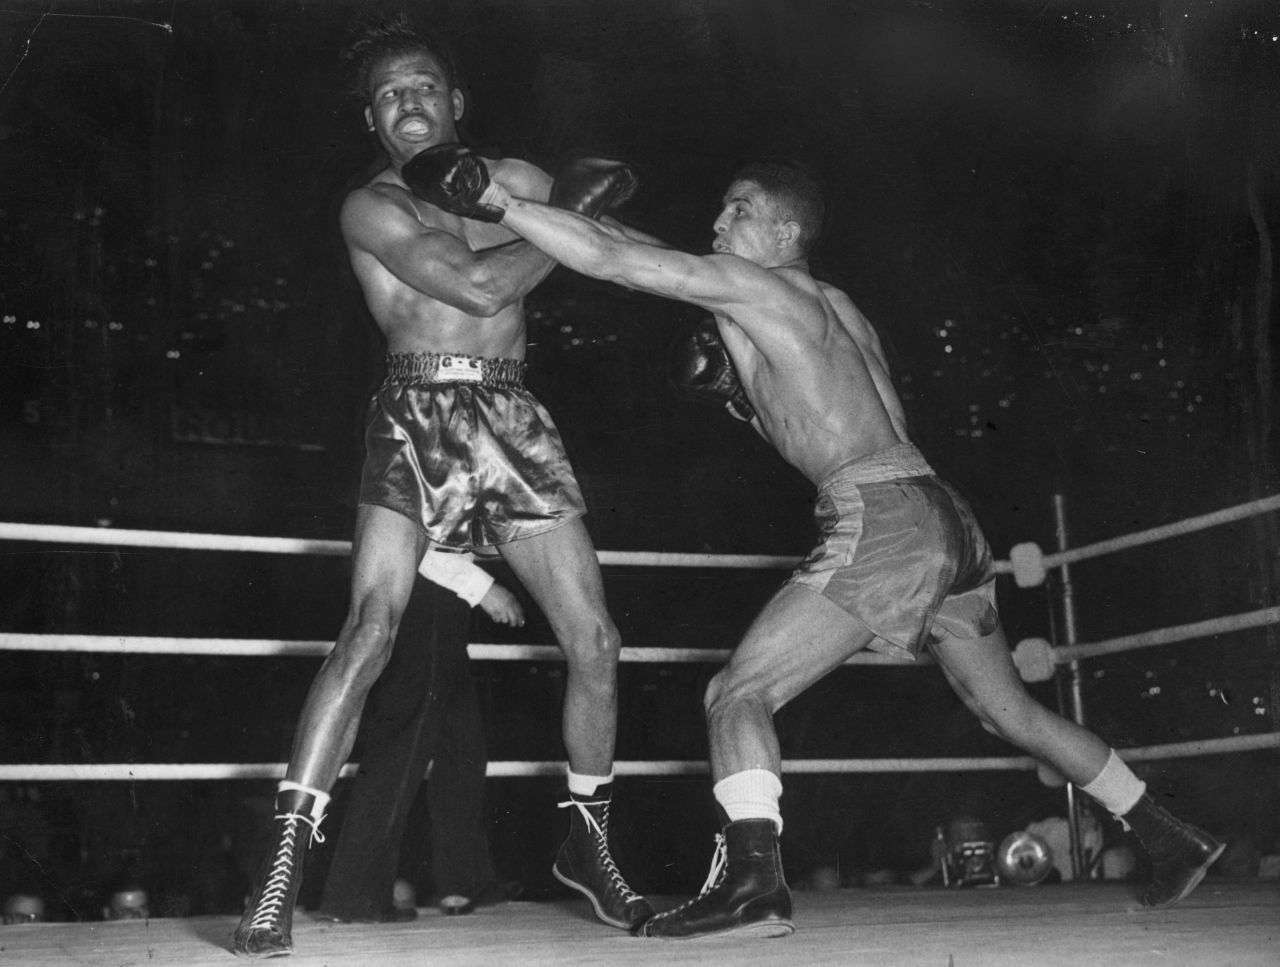 Mayweather would contest the point, but for many "Sugar" Ray Robinson was the best boxer to ever set a foot into the ring. His glittering career was not without its hiccups, however.<br /><br />Journeying to London with a record of 128-1-2, few reckoned Randy Turpin stood a chance against the American. But blessed with confidence and indefatigable spirit the Brit let fly his jab and kept the dancing feet of Robinson in check, claiming the middleweight crown after 15 rounds.